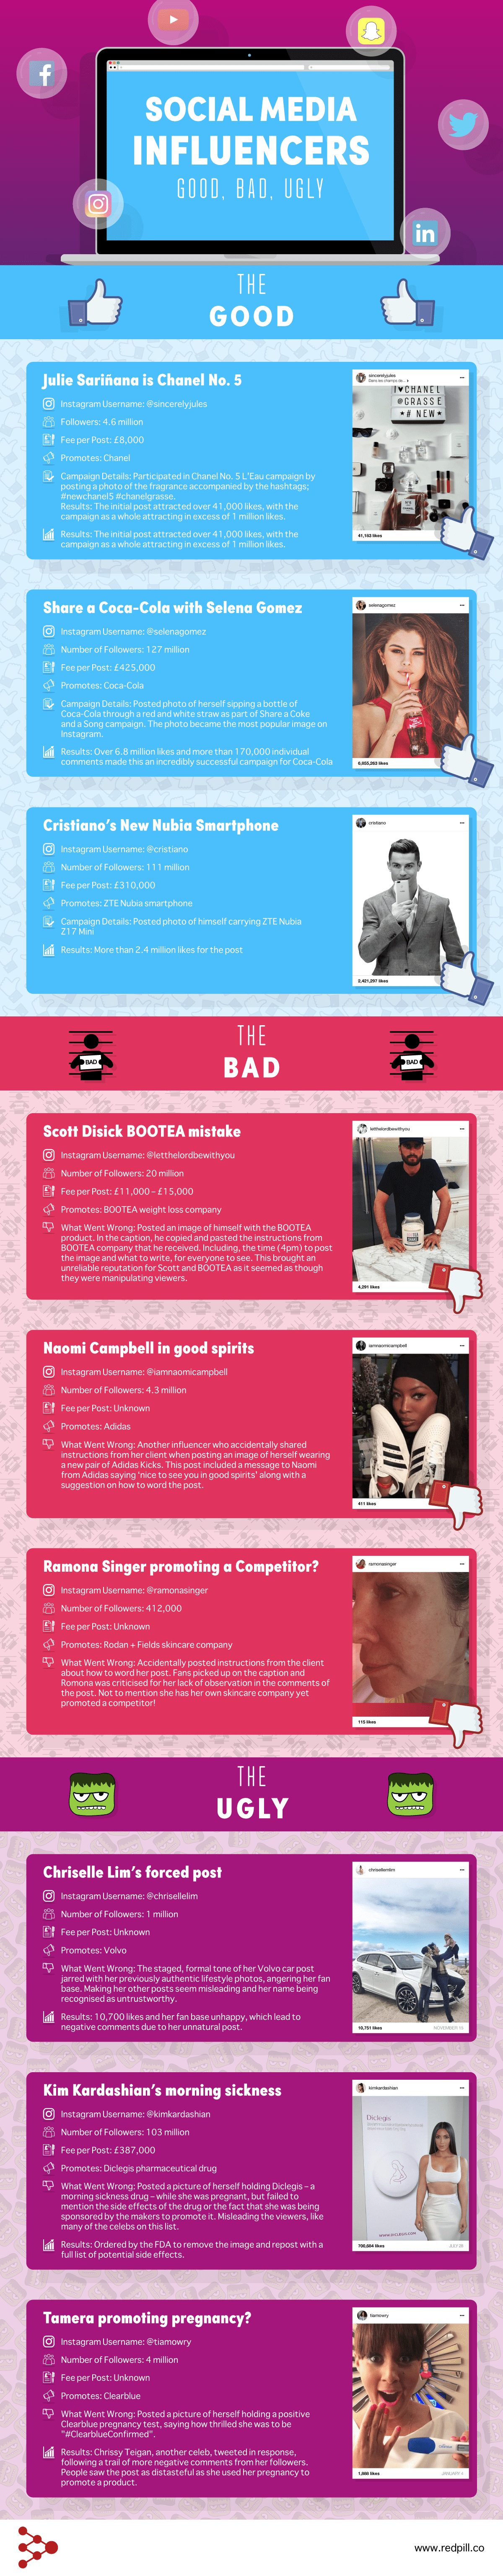 The Good The Bad The Ugly Of Social Media Influencers - #Infographic